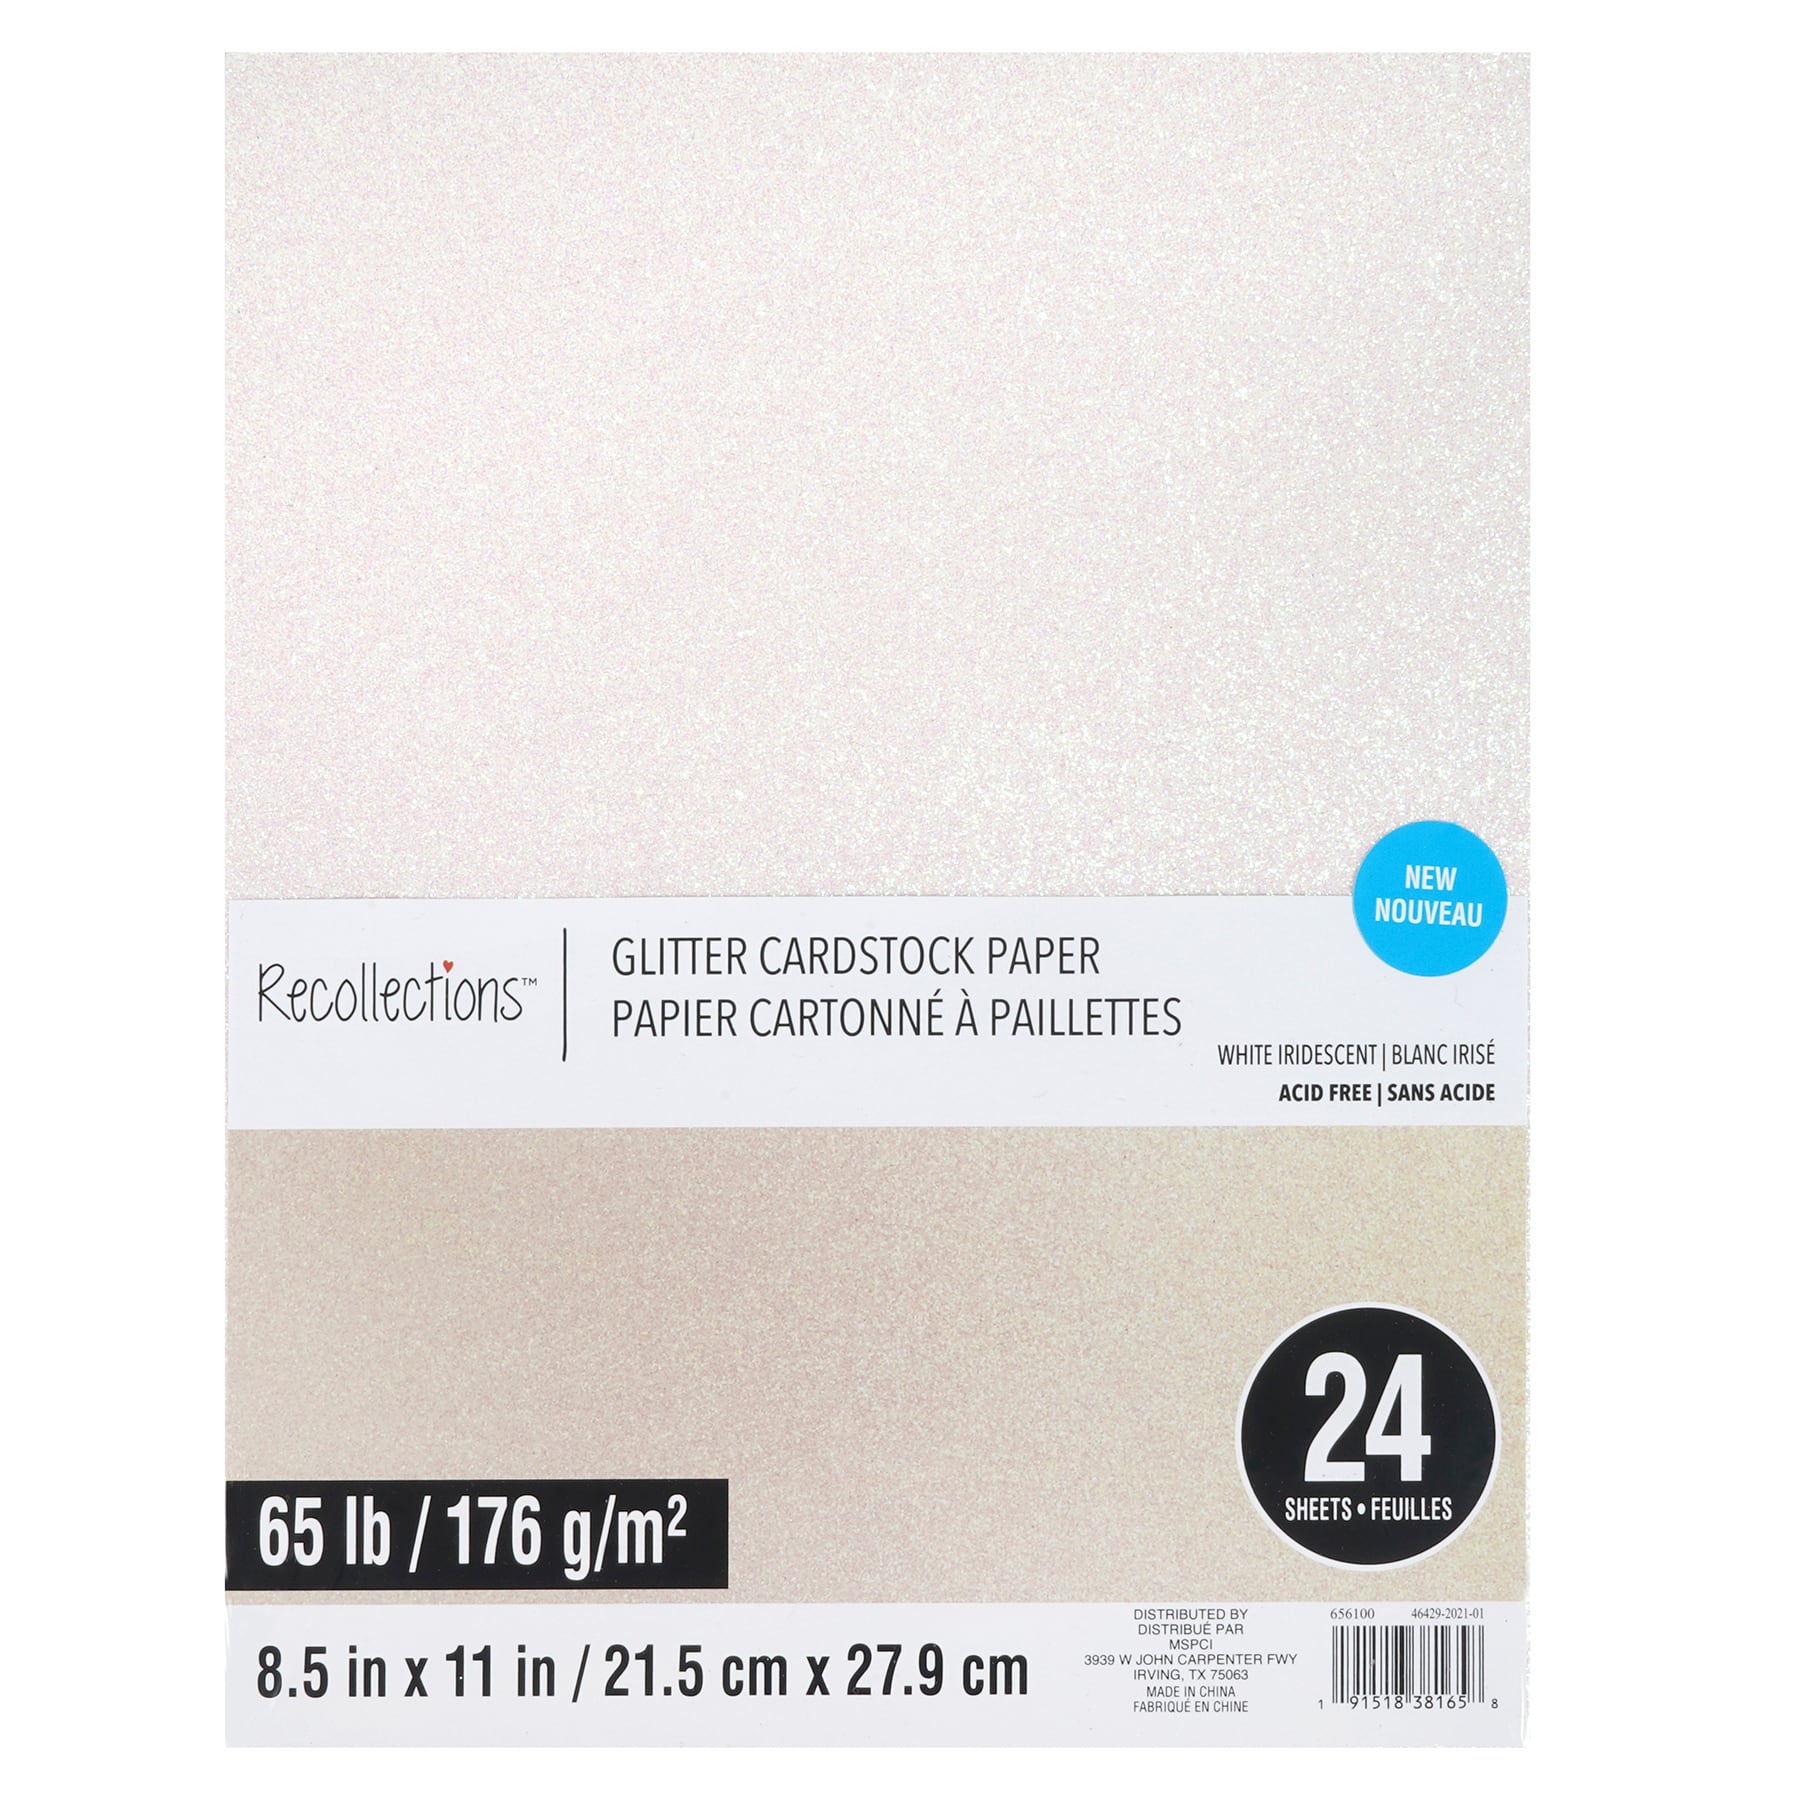 White Glitter Cardstock - 10 Sheets Premium Glitter Paper - Sized 12 x 12  - Perfect for Scrapbooking, Crafts, Decorations, Weddings